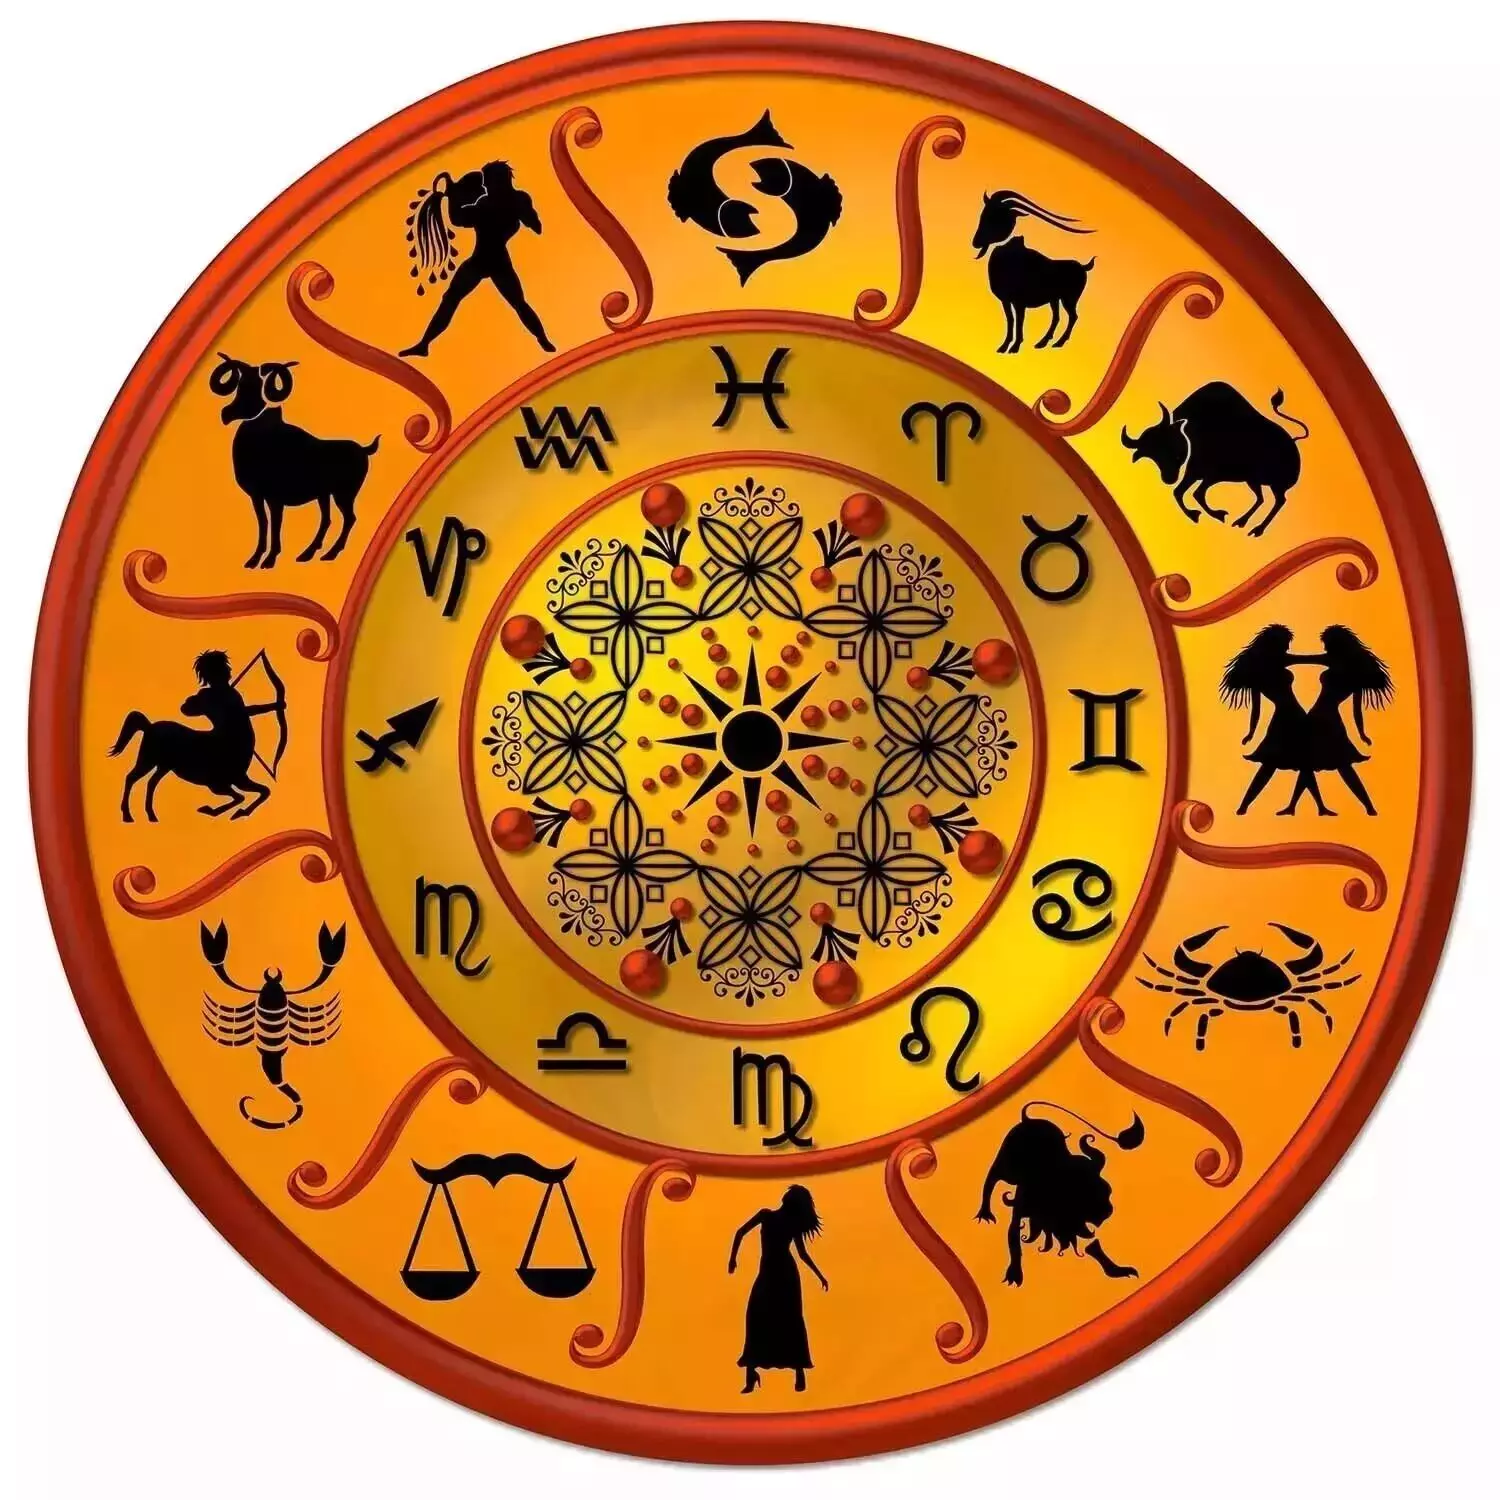 08 March  – Know your todays horoscope